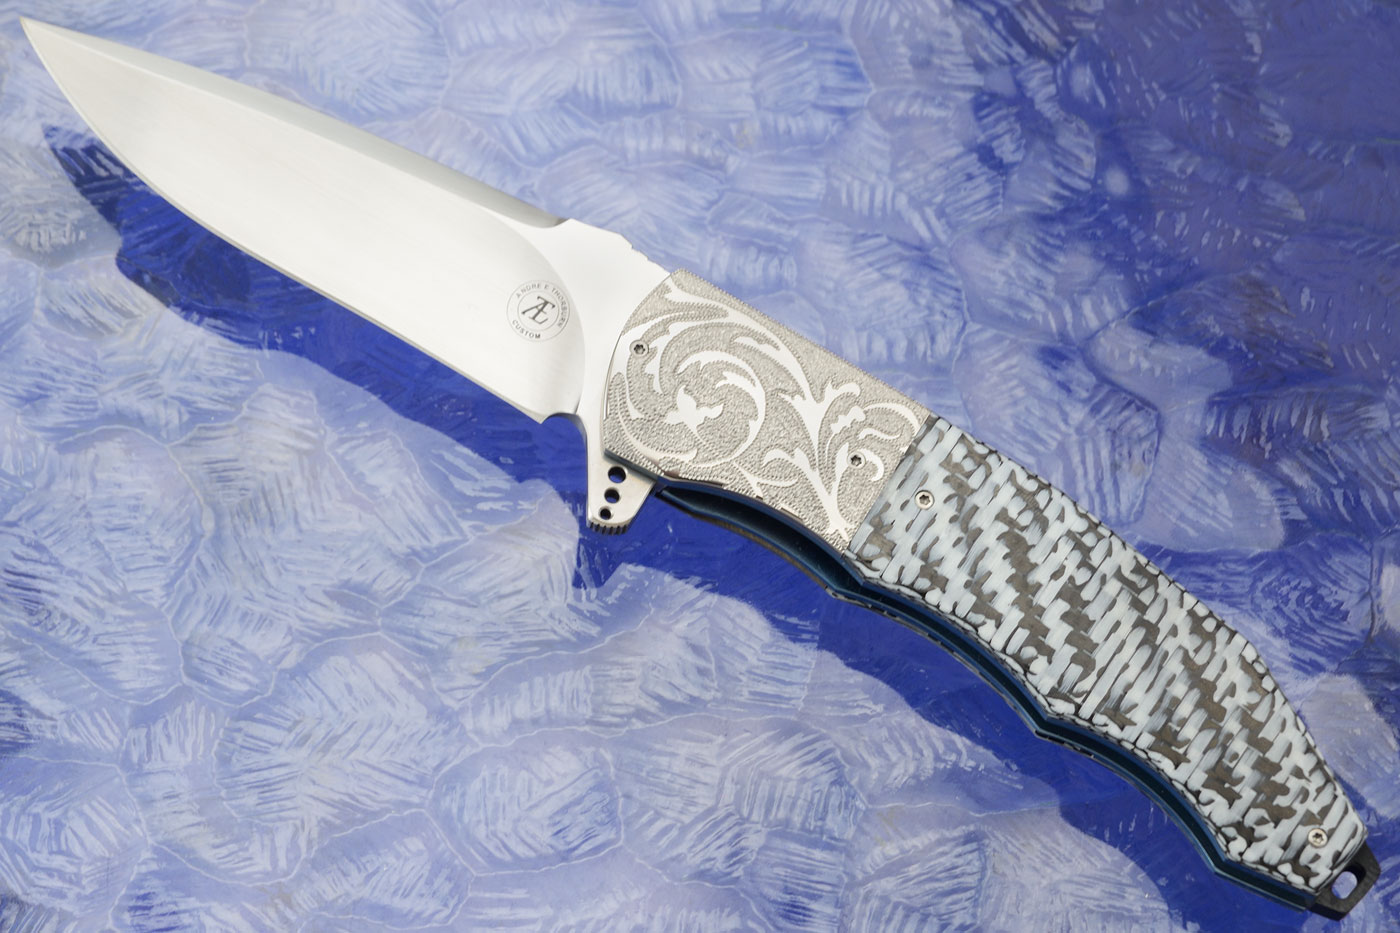 L53 Flipper with Black and White Carbon Fiber (Ceramic IKBS) - CTS-XHP